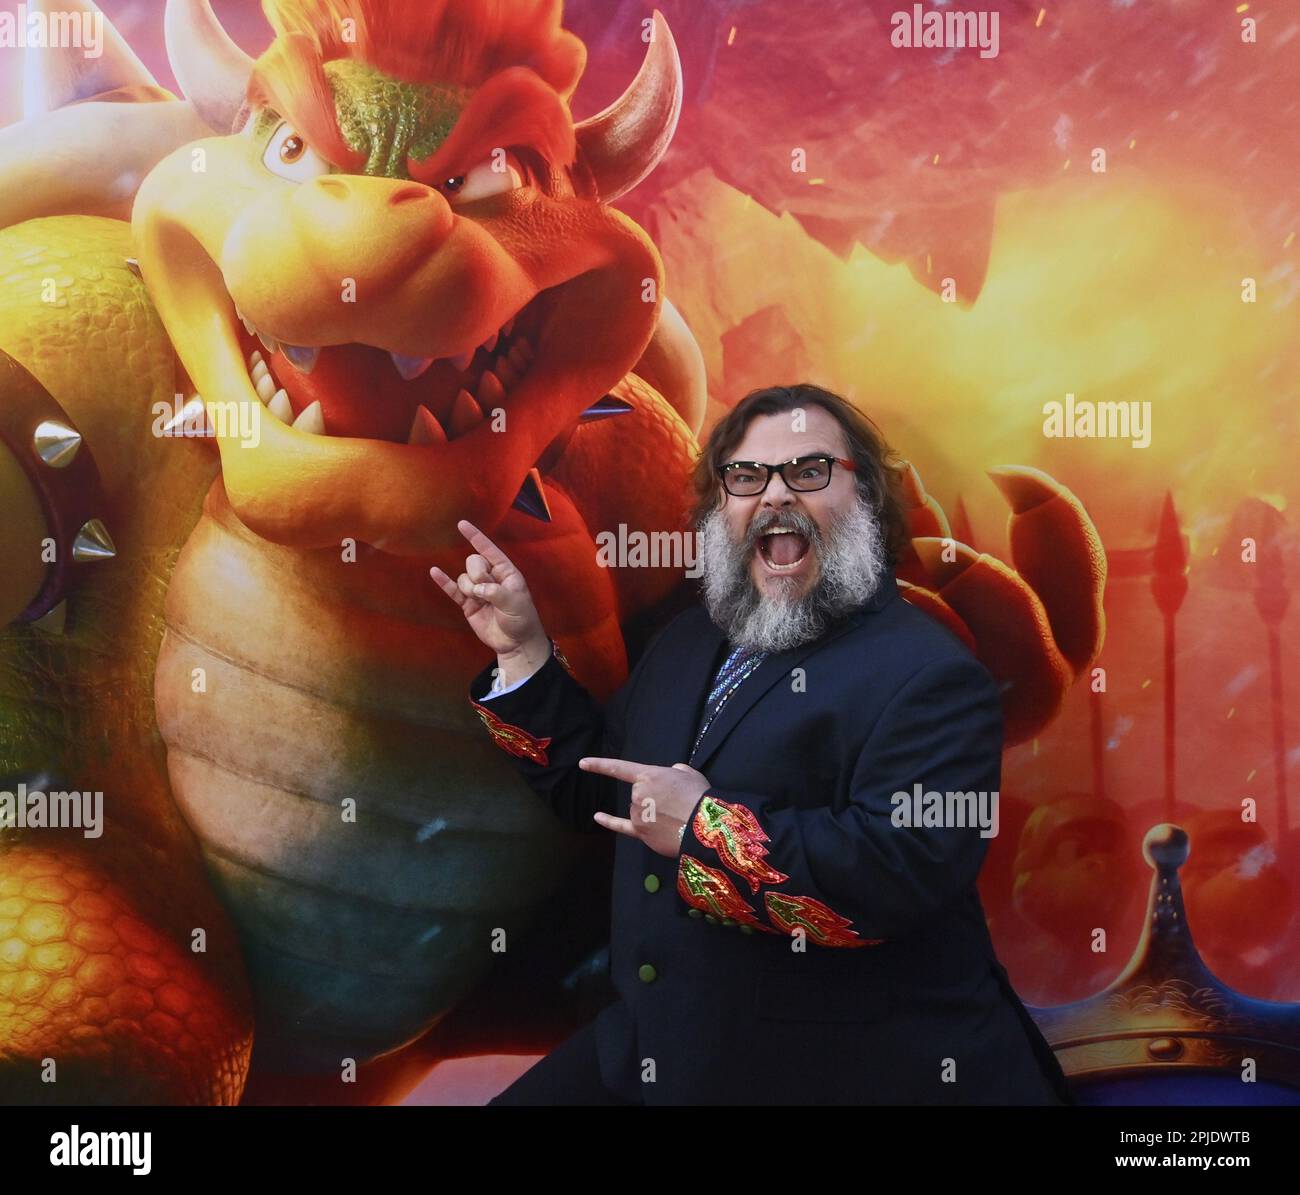 Los Angeles, United States. 01st Apr, 2023. Cast member Jack Black, the voice of Bowser, attends the premiere of the animated sci-fi fantasy comedy motion picture 'The Super Mario Bros. Movie' at Regal L.A. Live in Los Angeles on Saturday, April 1, 2023. Storyline: A Brooklyn plumber named Mario travels through the Mushroom Kingdom with a princess named Peach and an anthropomorphic mushroom named Toad to find Mario's brother, Luigi, and to save the world from a ruthless fire-breathing Koopa named Bowser. Photo by Jim Ruymen/UPI Credit: UPI/Alamy Live News Stock Photo